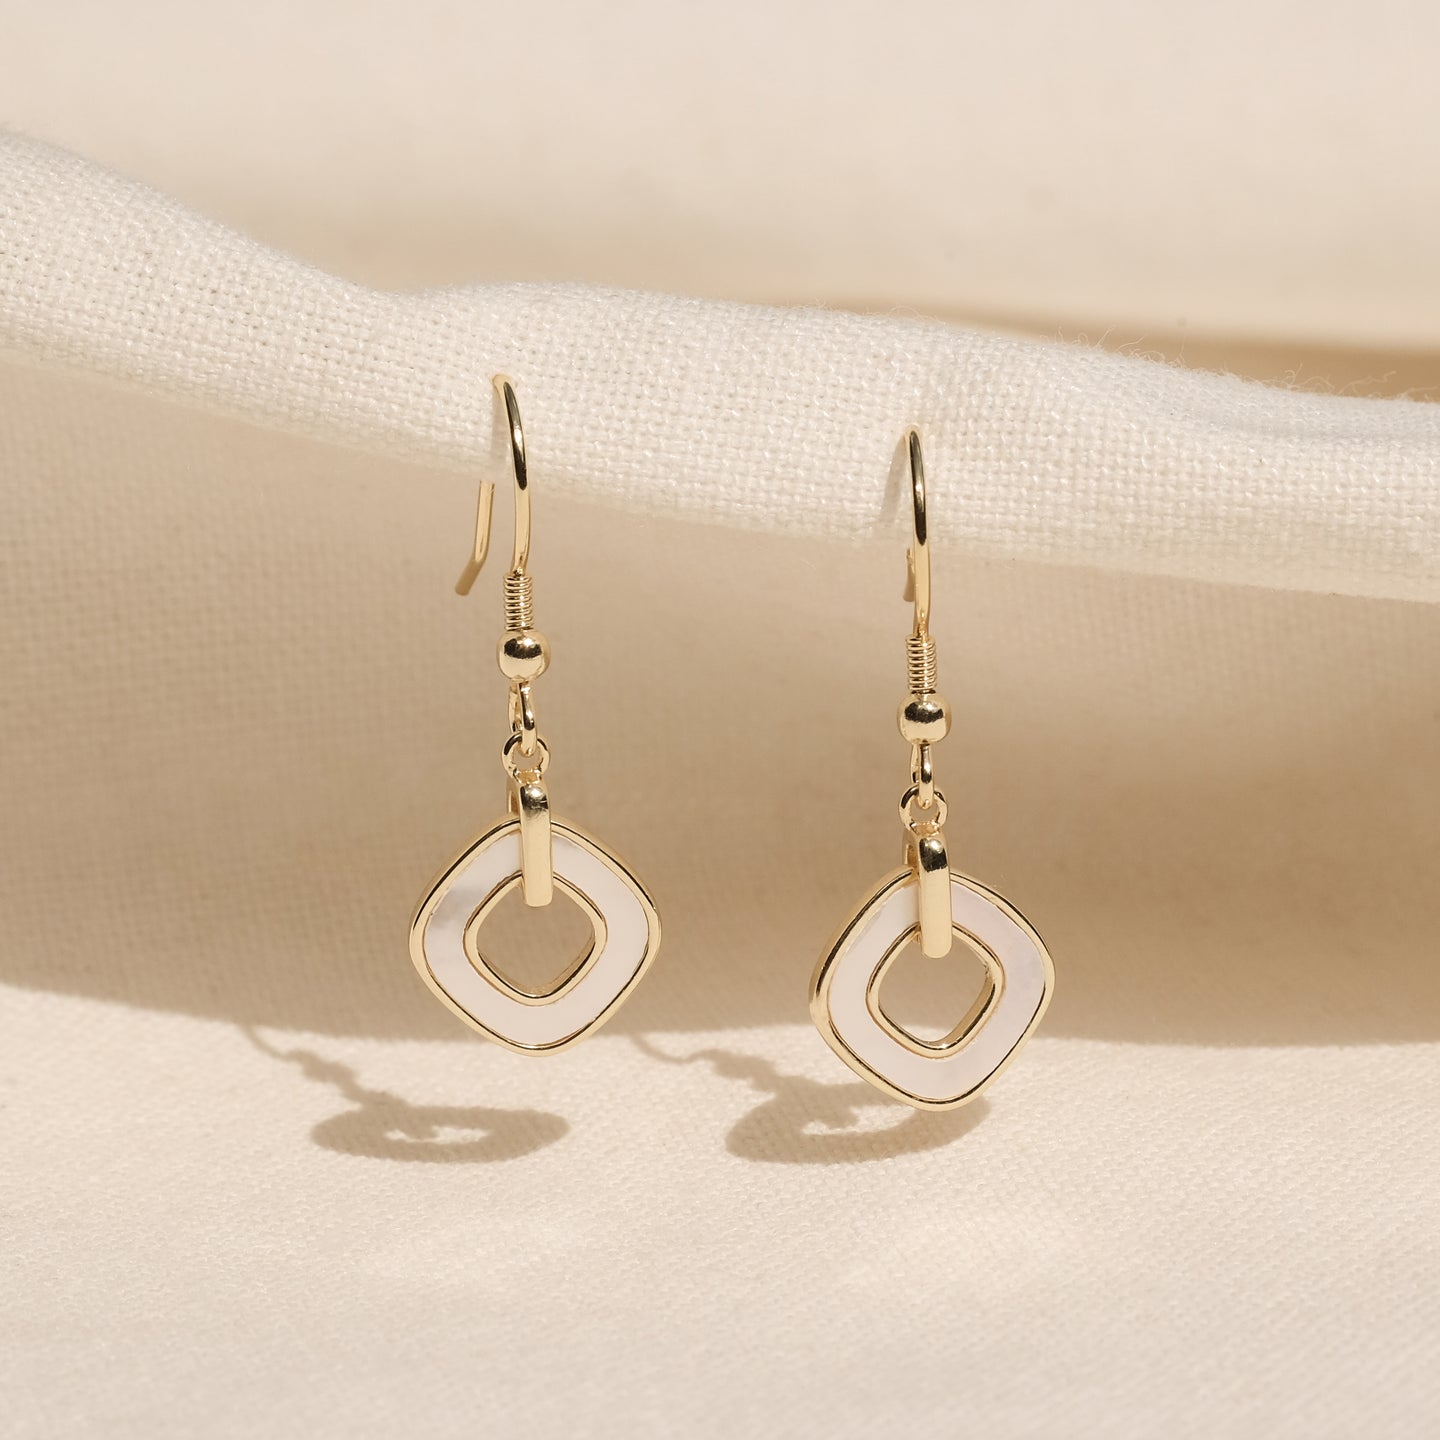 products/mave-mother-of-pearl-earrings-18k-gold-vermeil-1.jpg